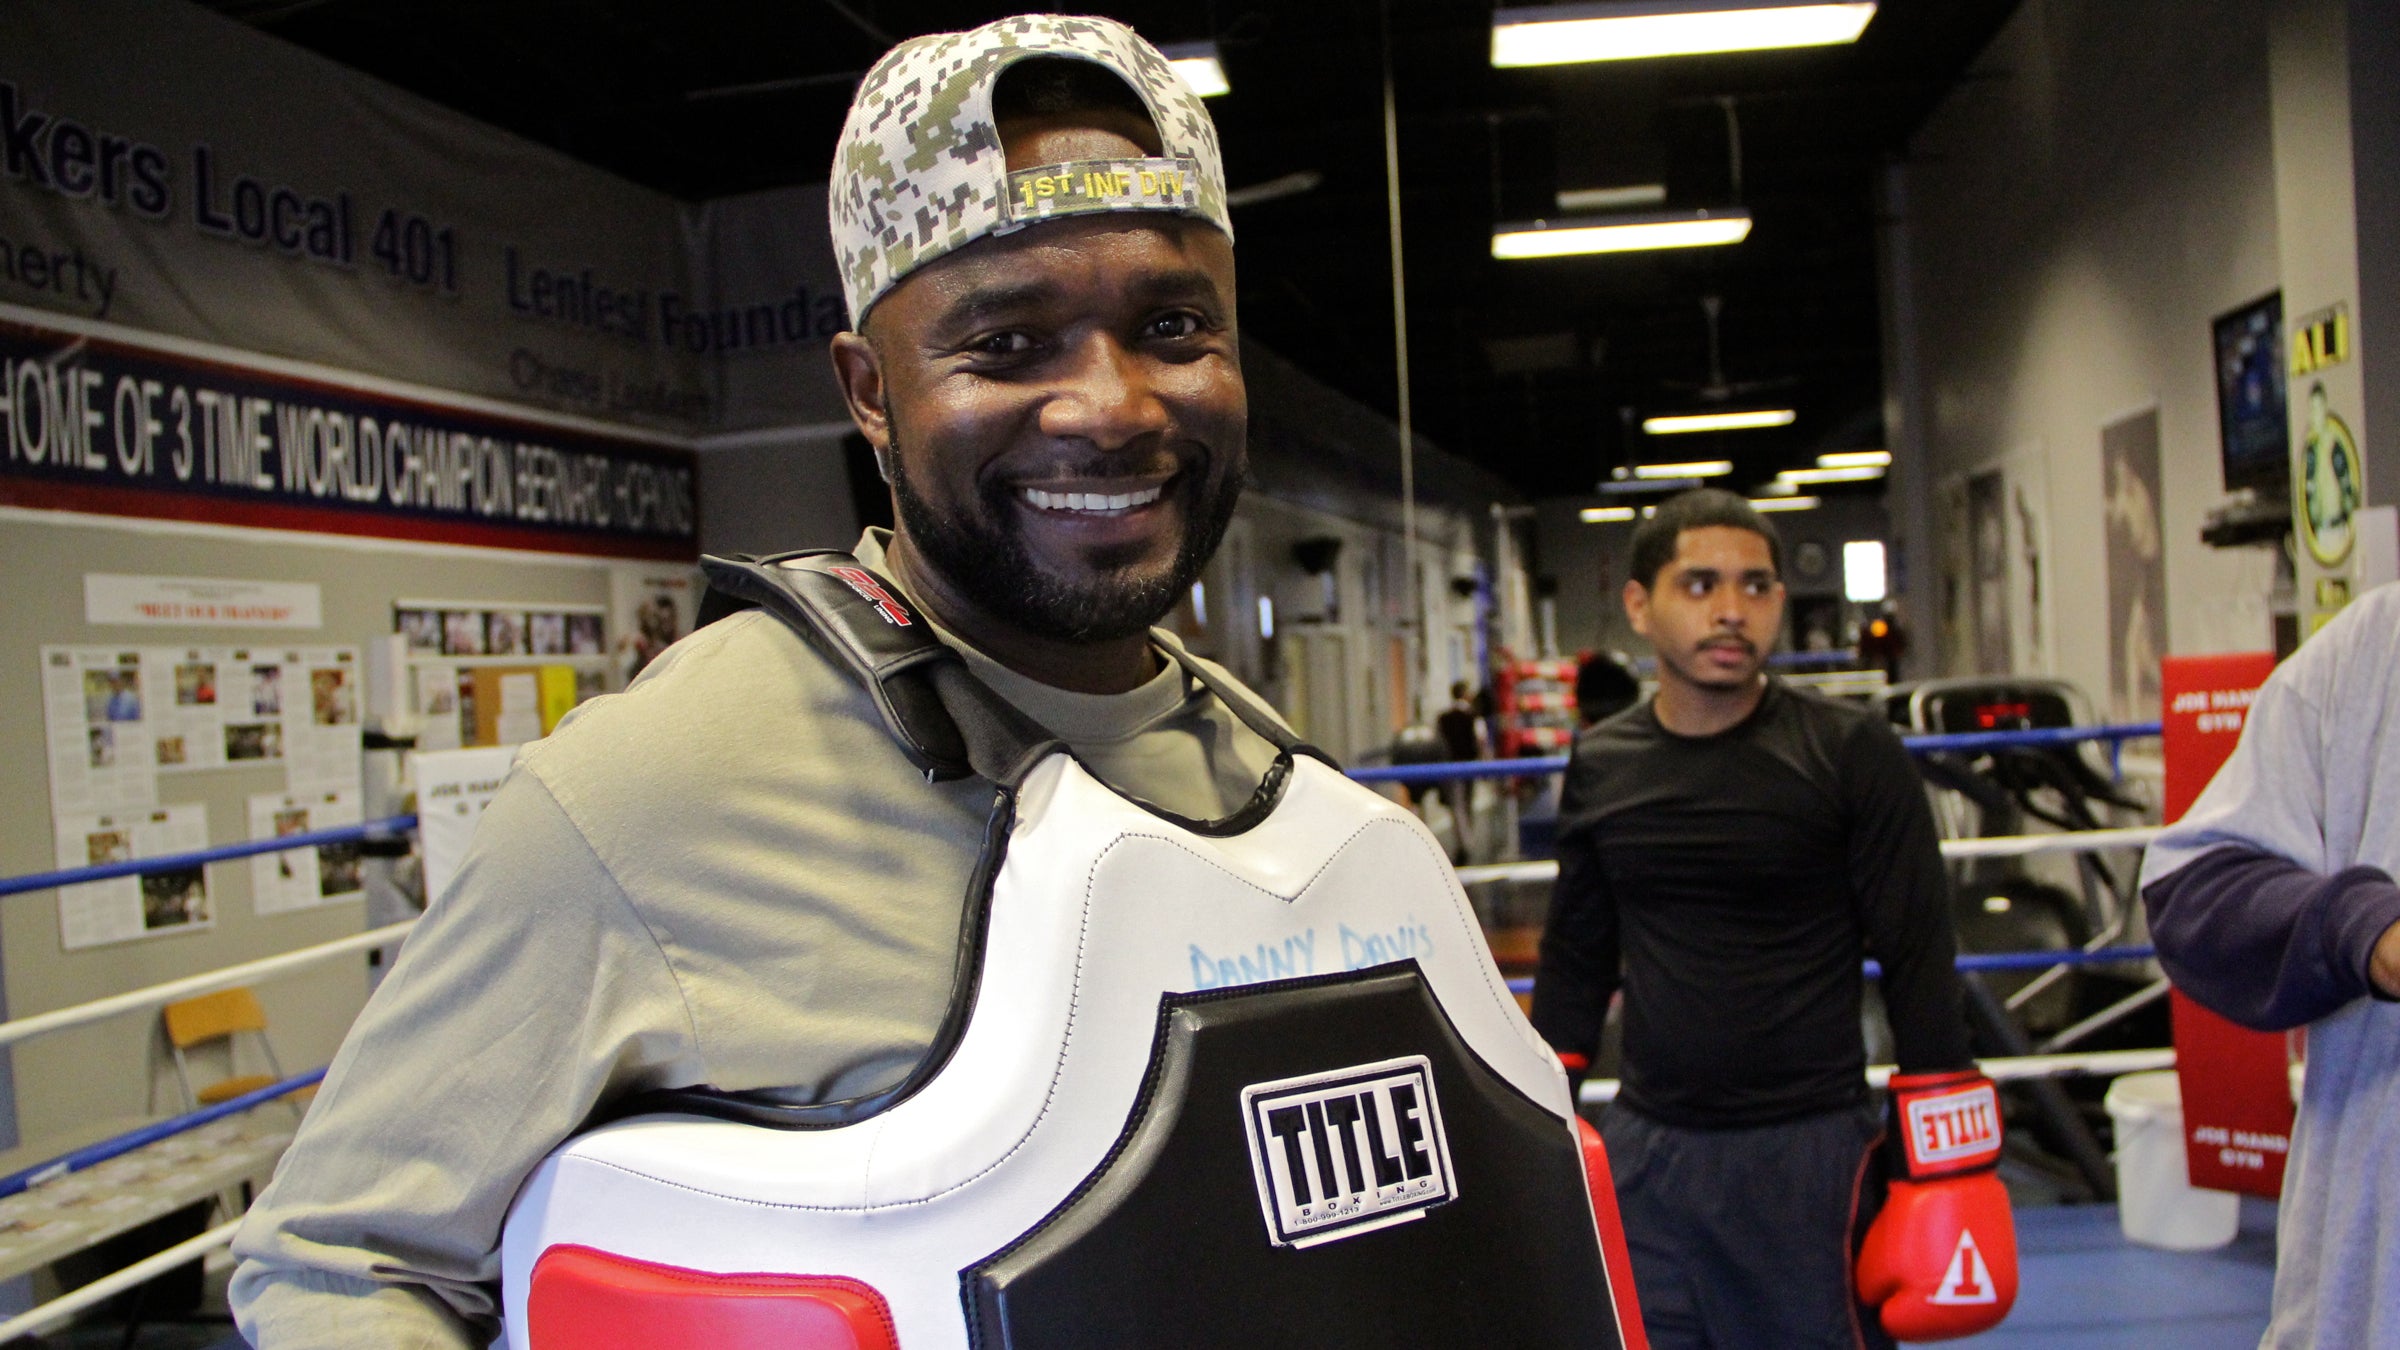  Veteran Wendell Chavis finds his joy at Joe Hand boxing gym, where he helps to train young fighters like Bryan Roque (right). (Emma Lee/WHYY) 